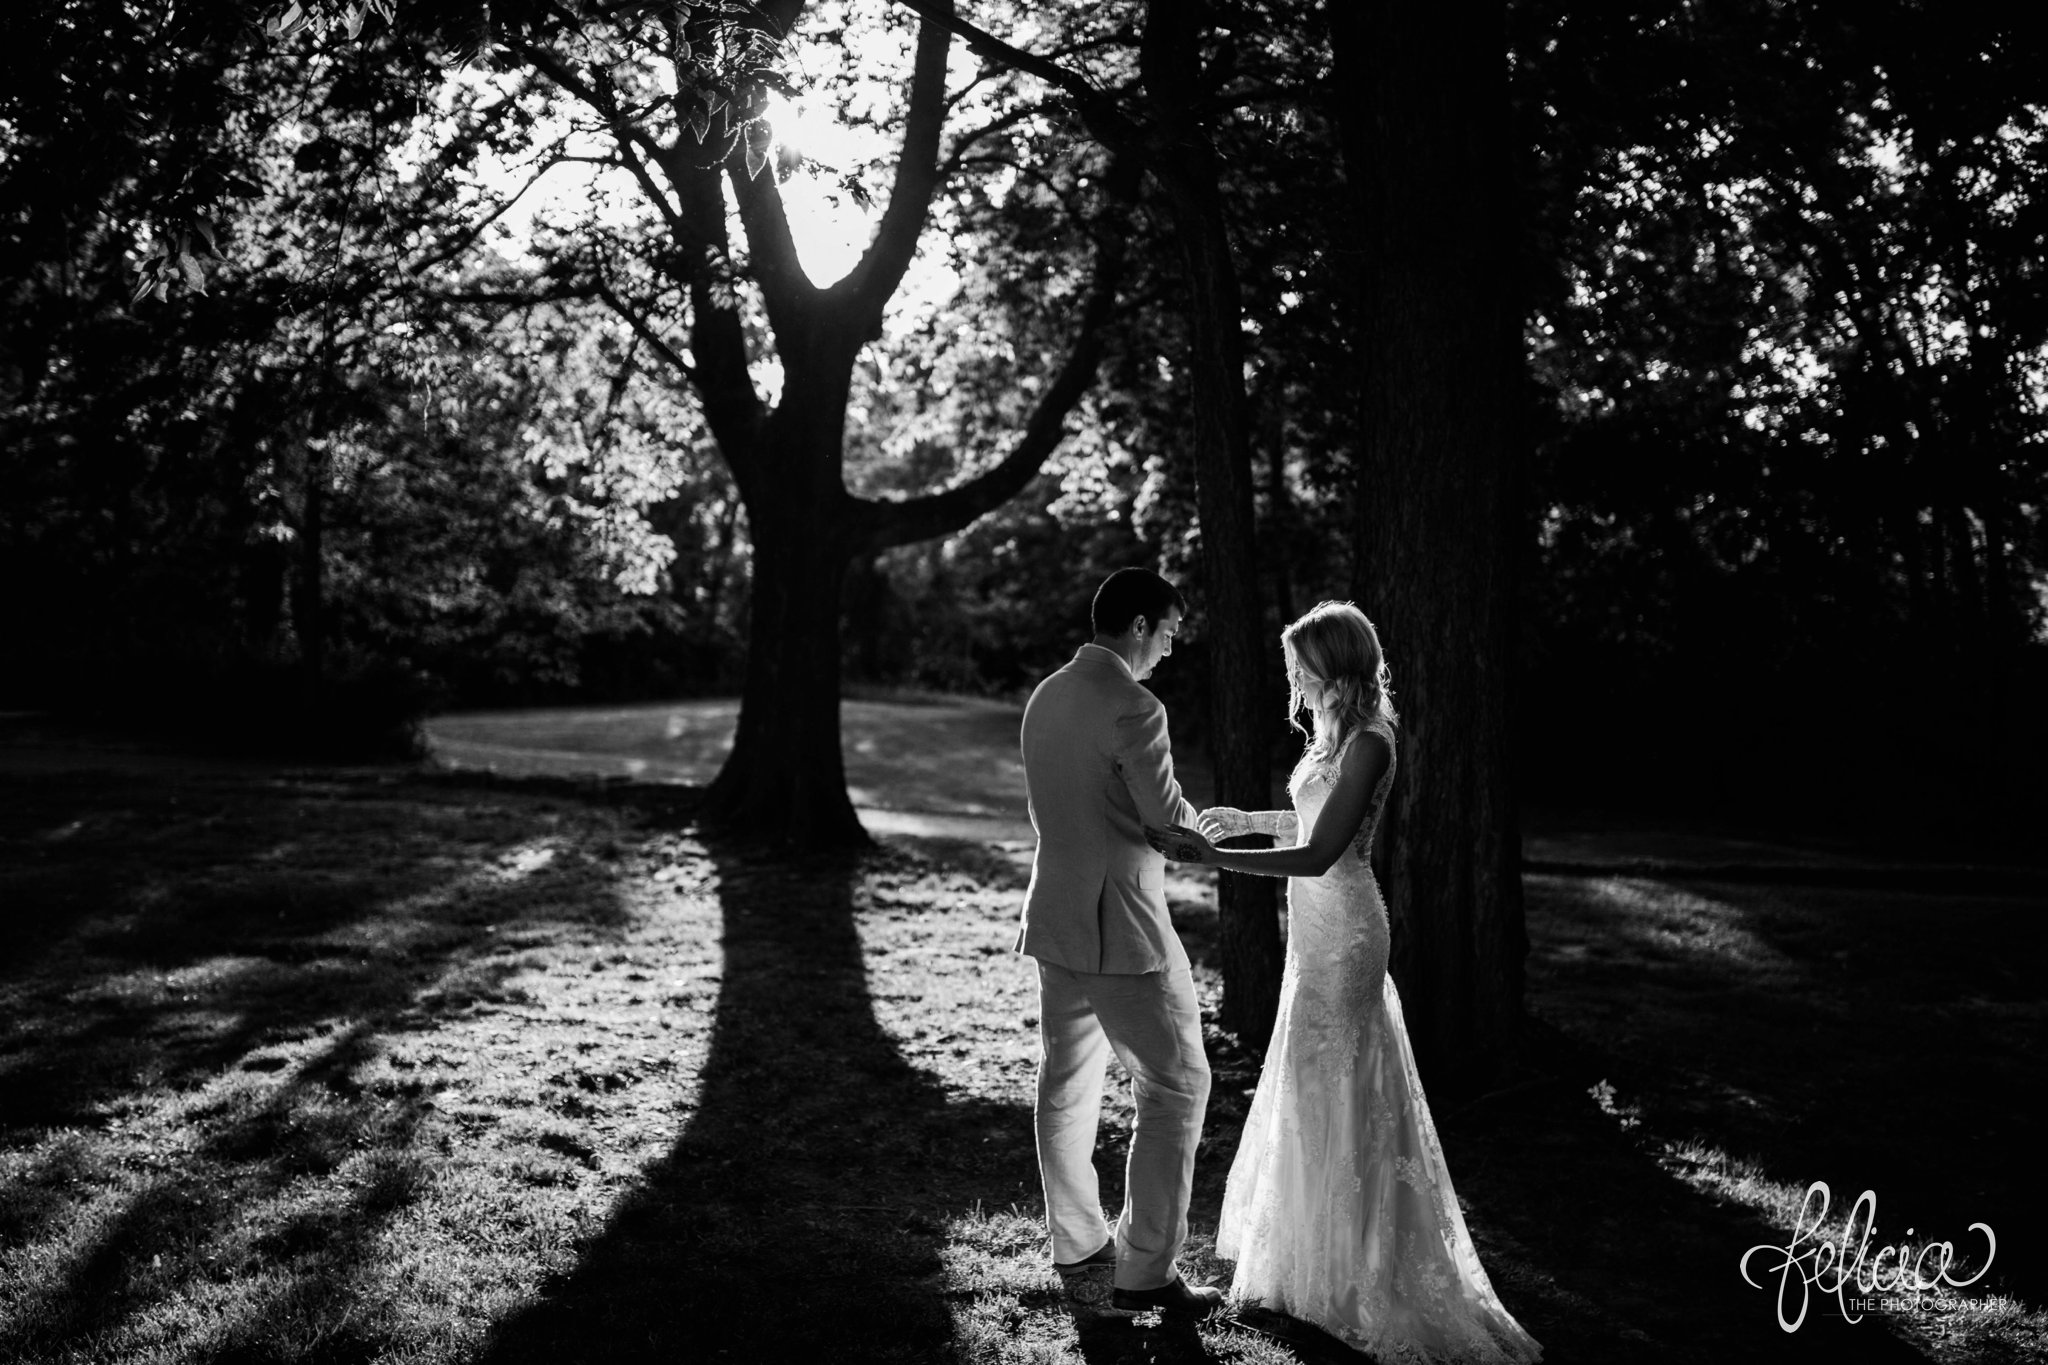 The Hawthorne House | Romantic Black and White | Sunset Pictures | Candid Bride and Groom | Kansas City Wedding | Felicia The Photographer